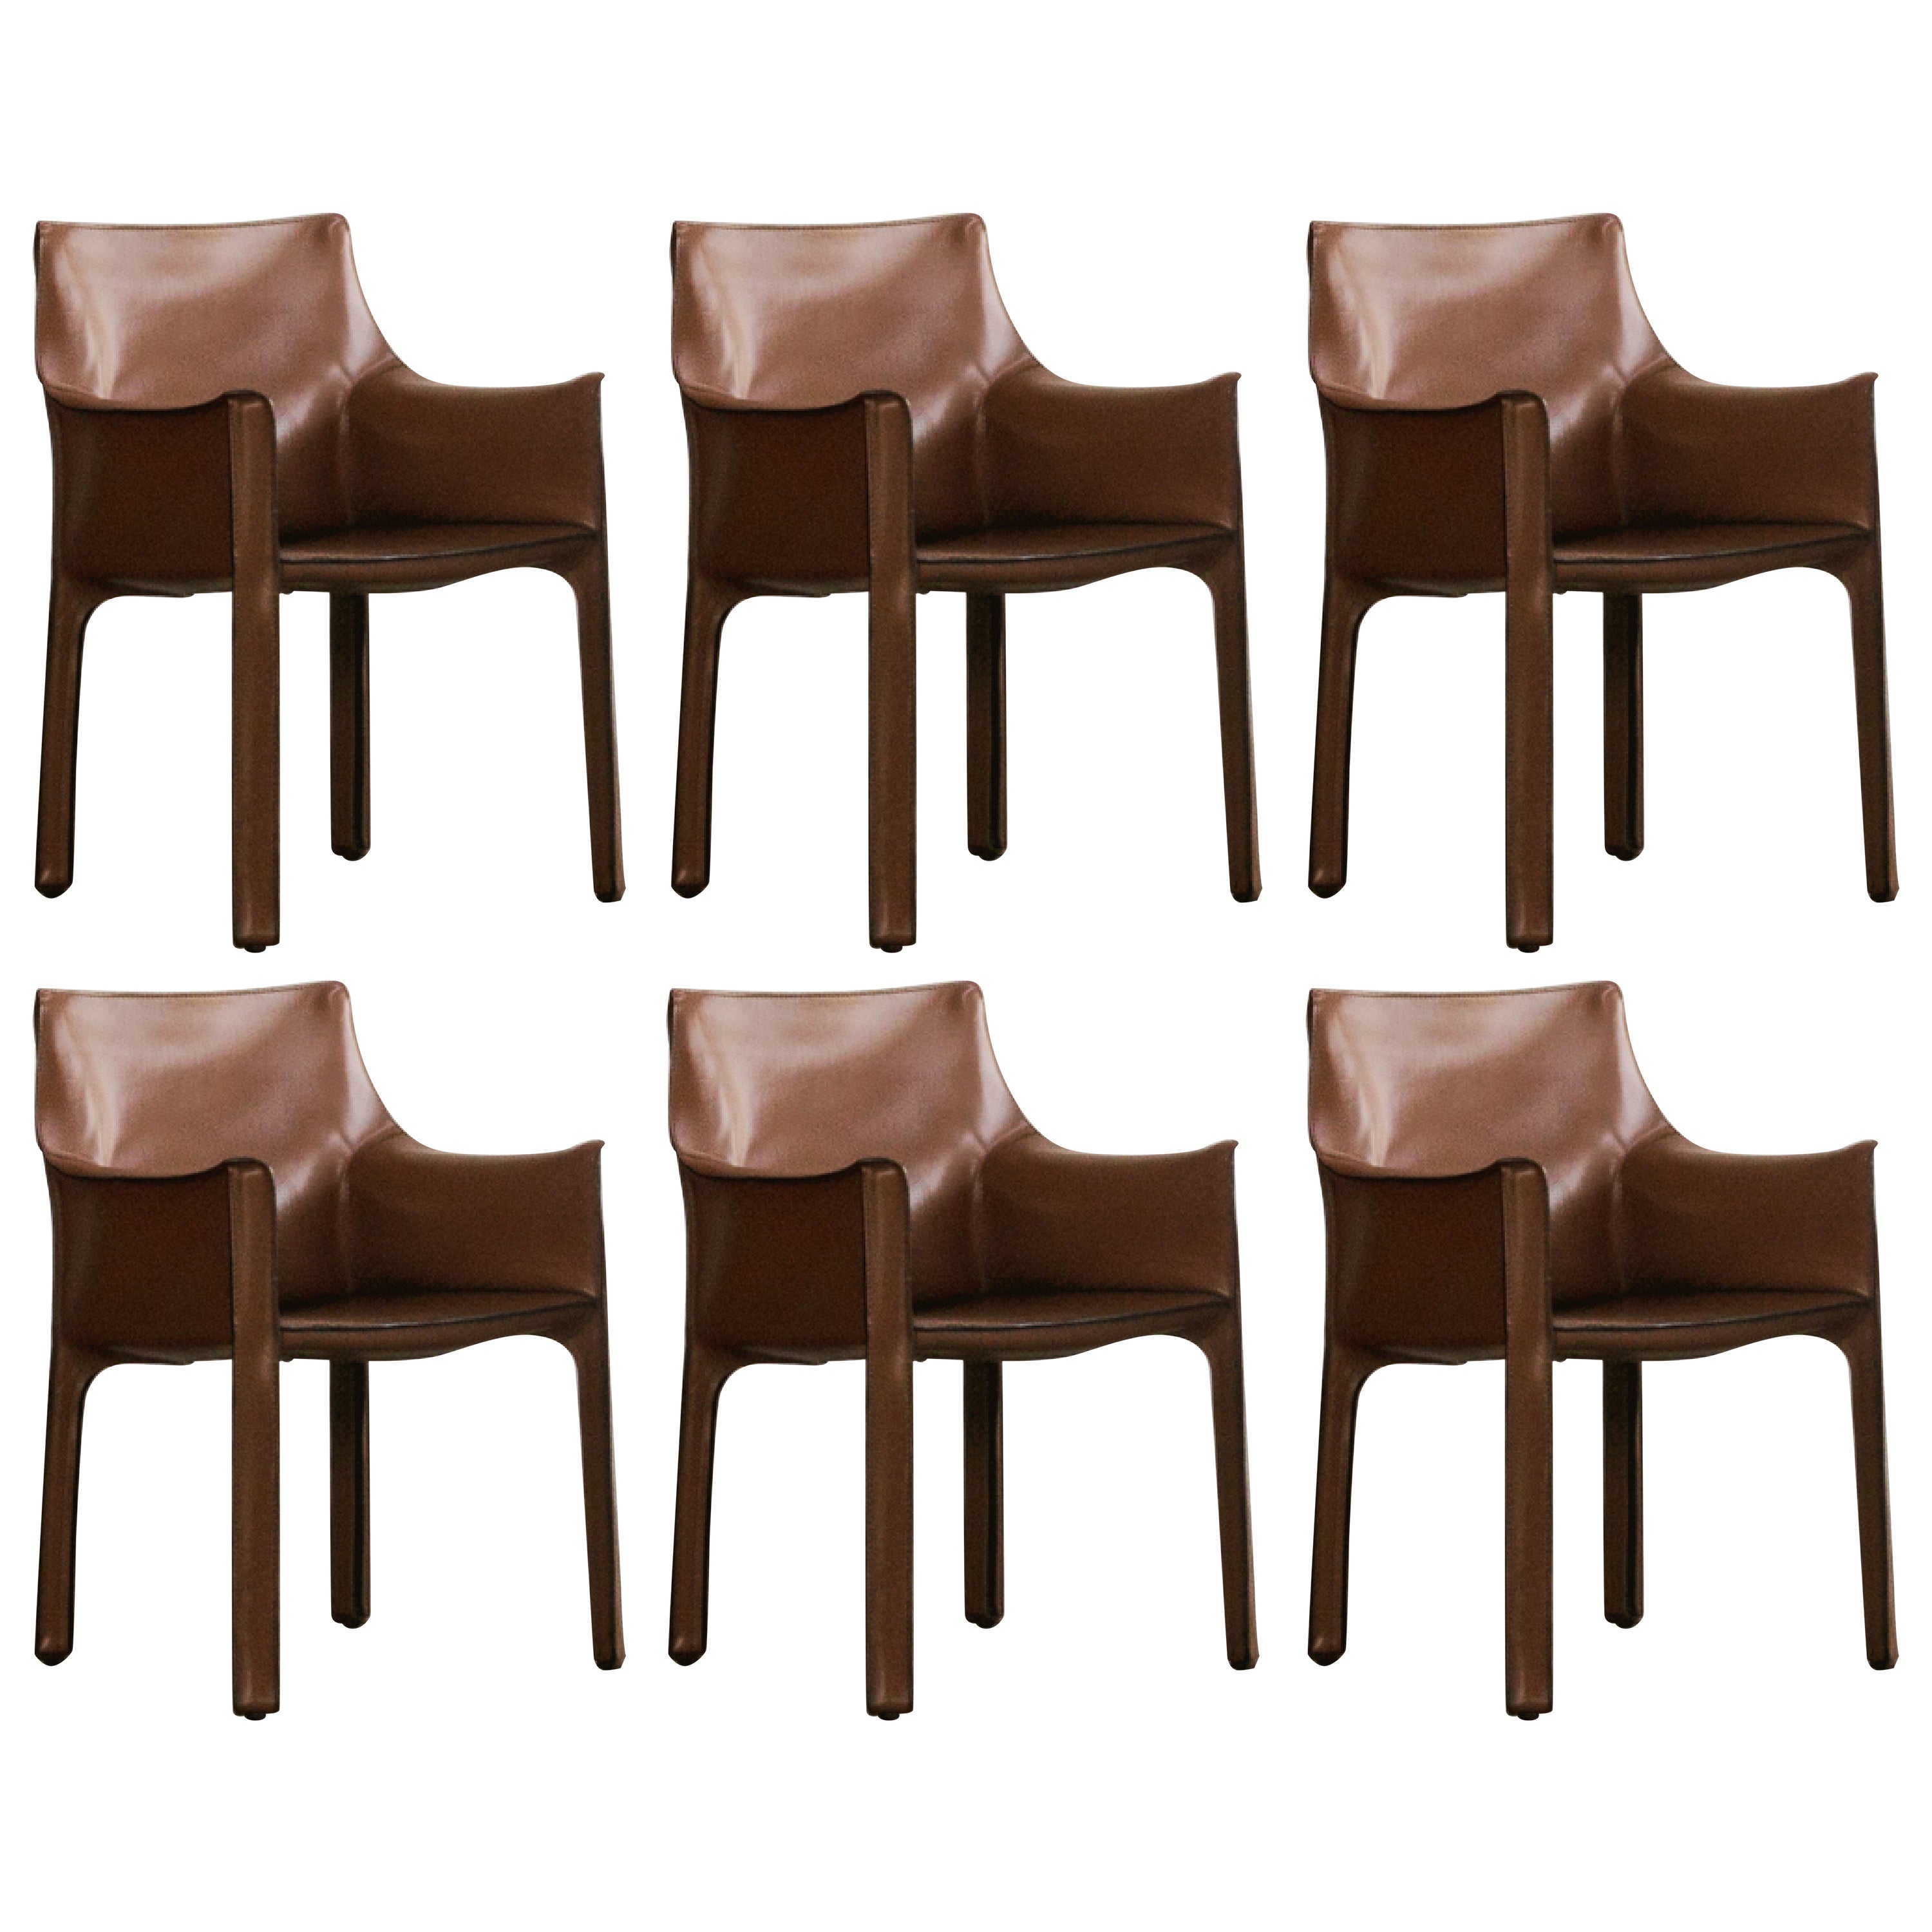 Mario Bellini "CAB 413" Chairs for Cassina in Light Brown, 1977, Set of 6